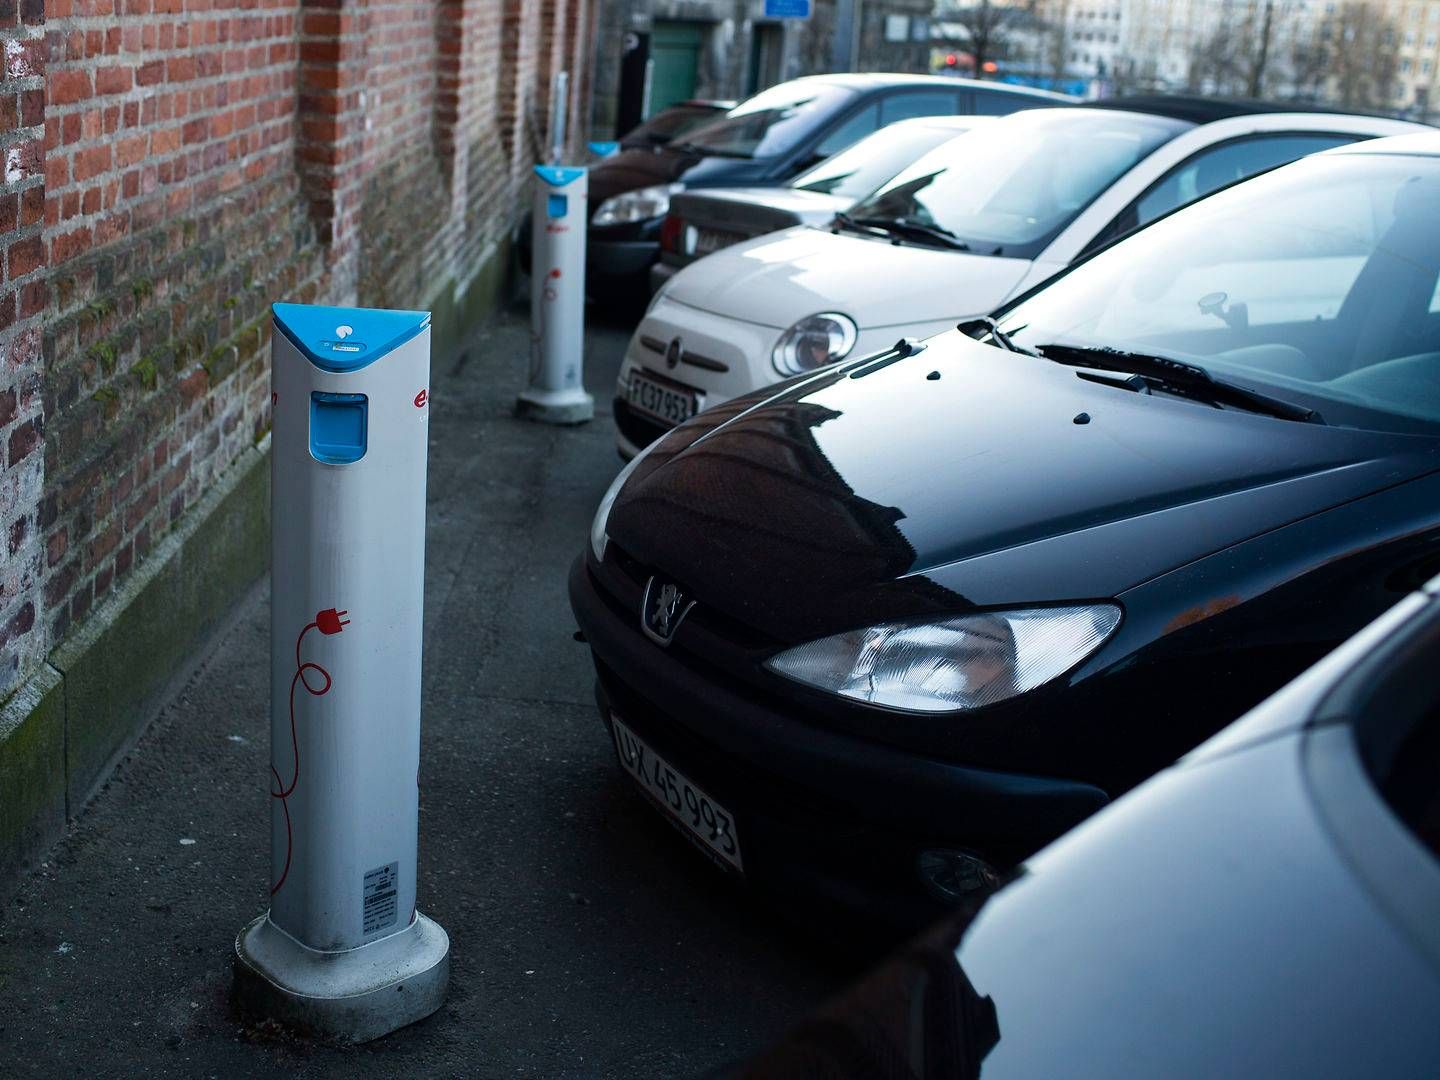 The EU Commission has presented a new mobility strategy that seeks to ensure 30 million emissions-free vehicles on European roads in 2030. | Photo: Katrine Marie Kragh/Jyllands-Posten/Ritzau Scanpix